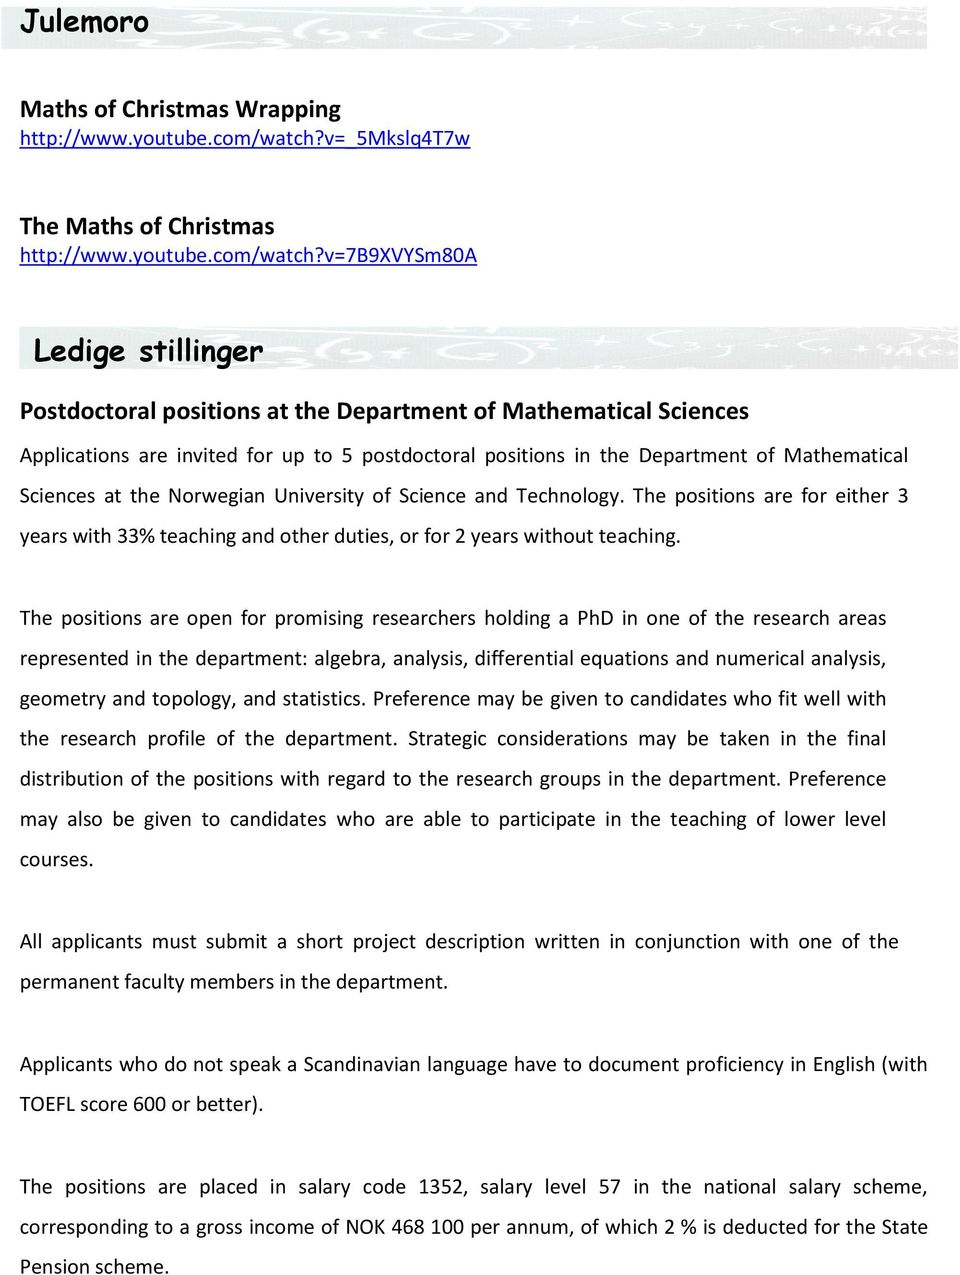 v=7b9xvysm80a Ledige stillinger Postdoctoral positions at the Department of Mathematical Sciences Applications are invited for up to 5 postdoctoral positions in the Department of Mathematical